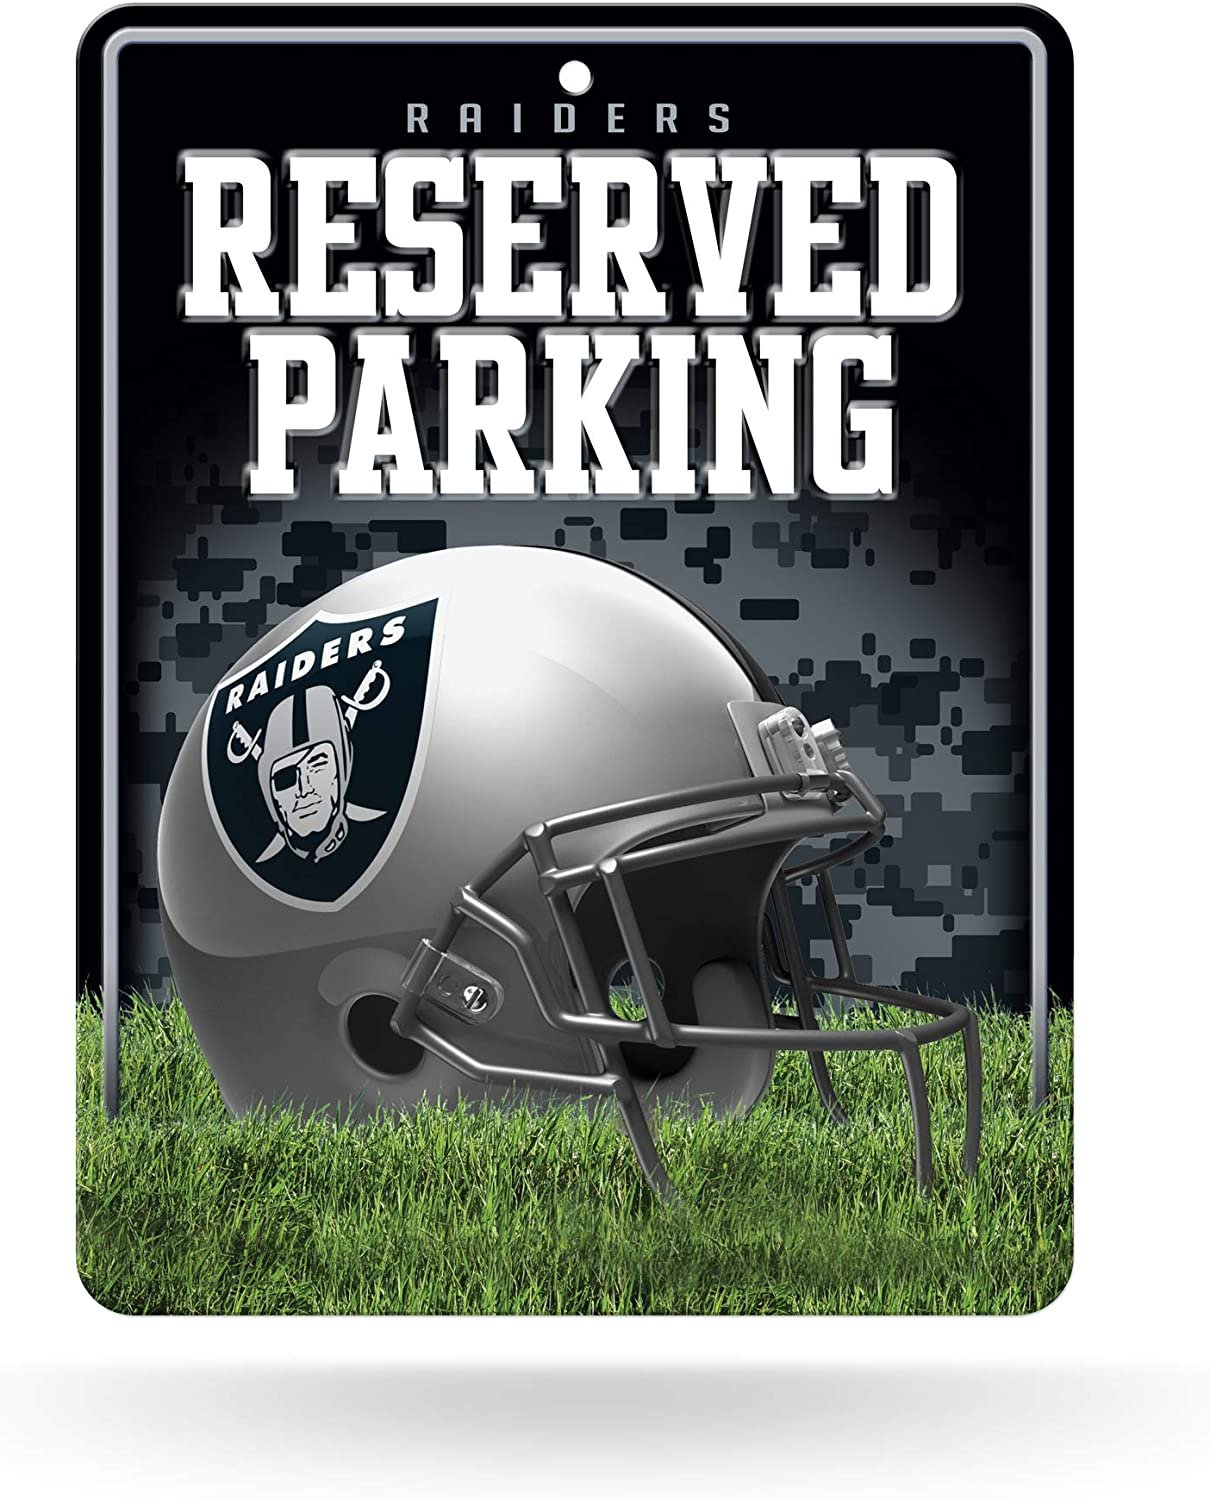 Las Vegas Raiders Metal Parking Sign, Reserved, 8.5 x 11 Inch, High Resolution